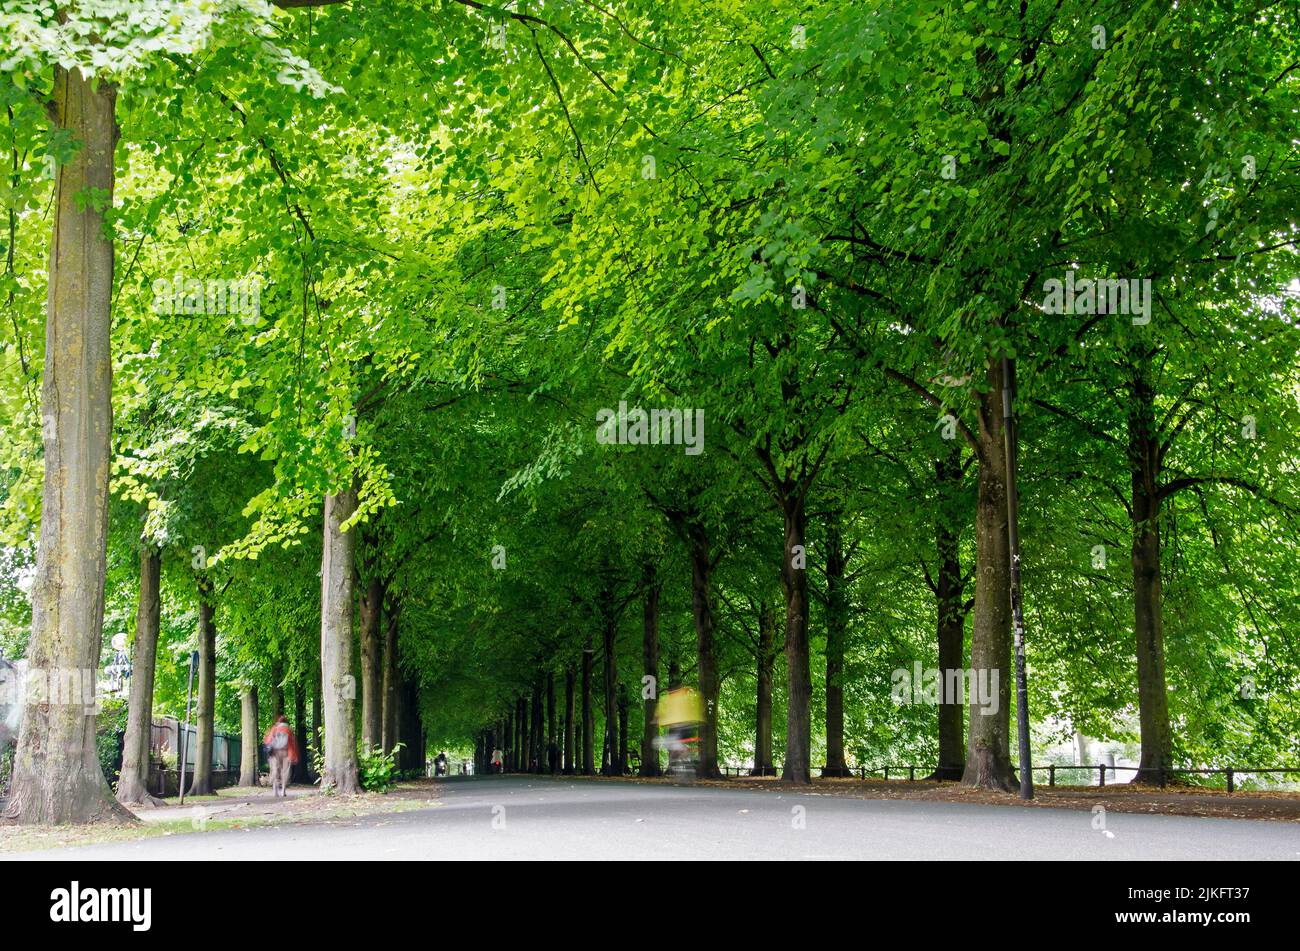 Münster, Germany, July 29, 2022: overwhelmingly green and shady canopy of four rows of trees on the 4,5 kilometer promenade around the city center Stock Photo